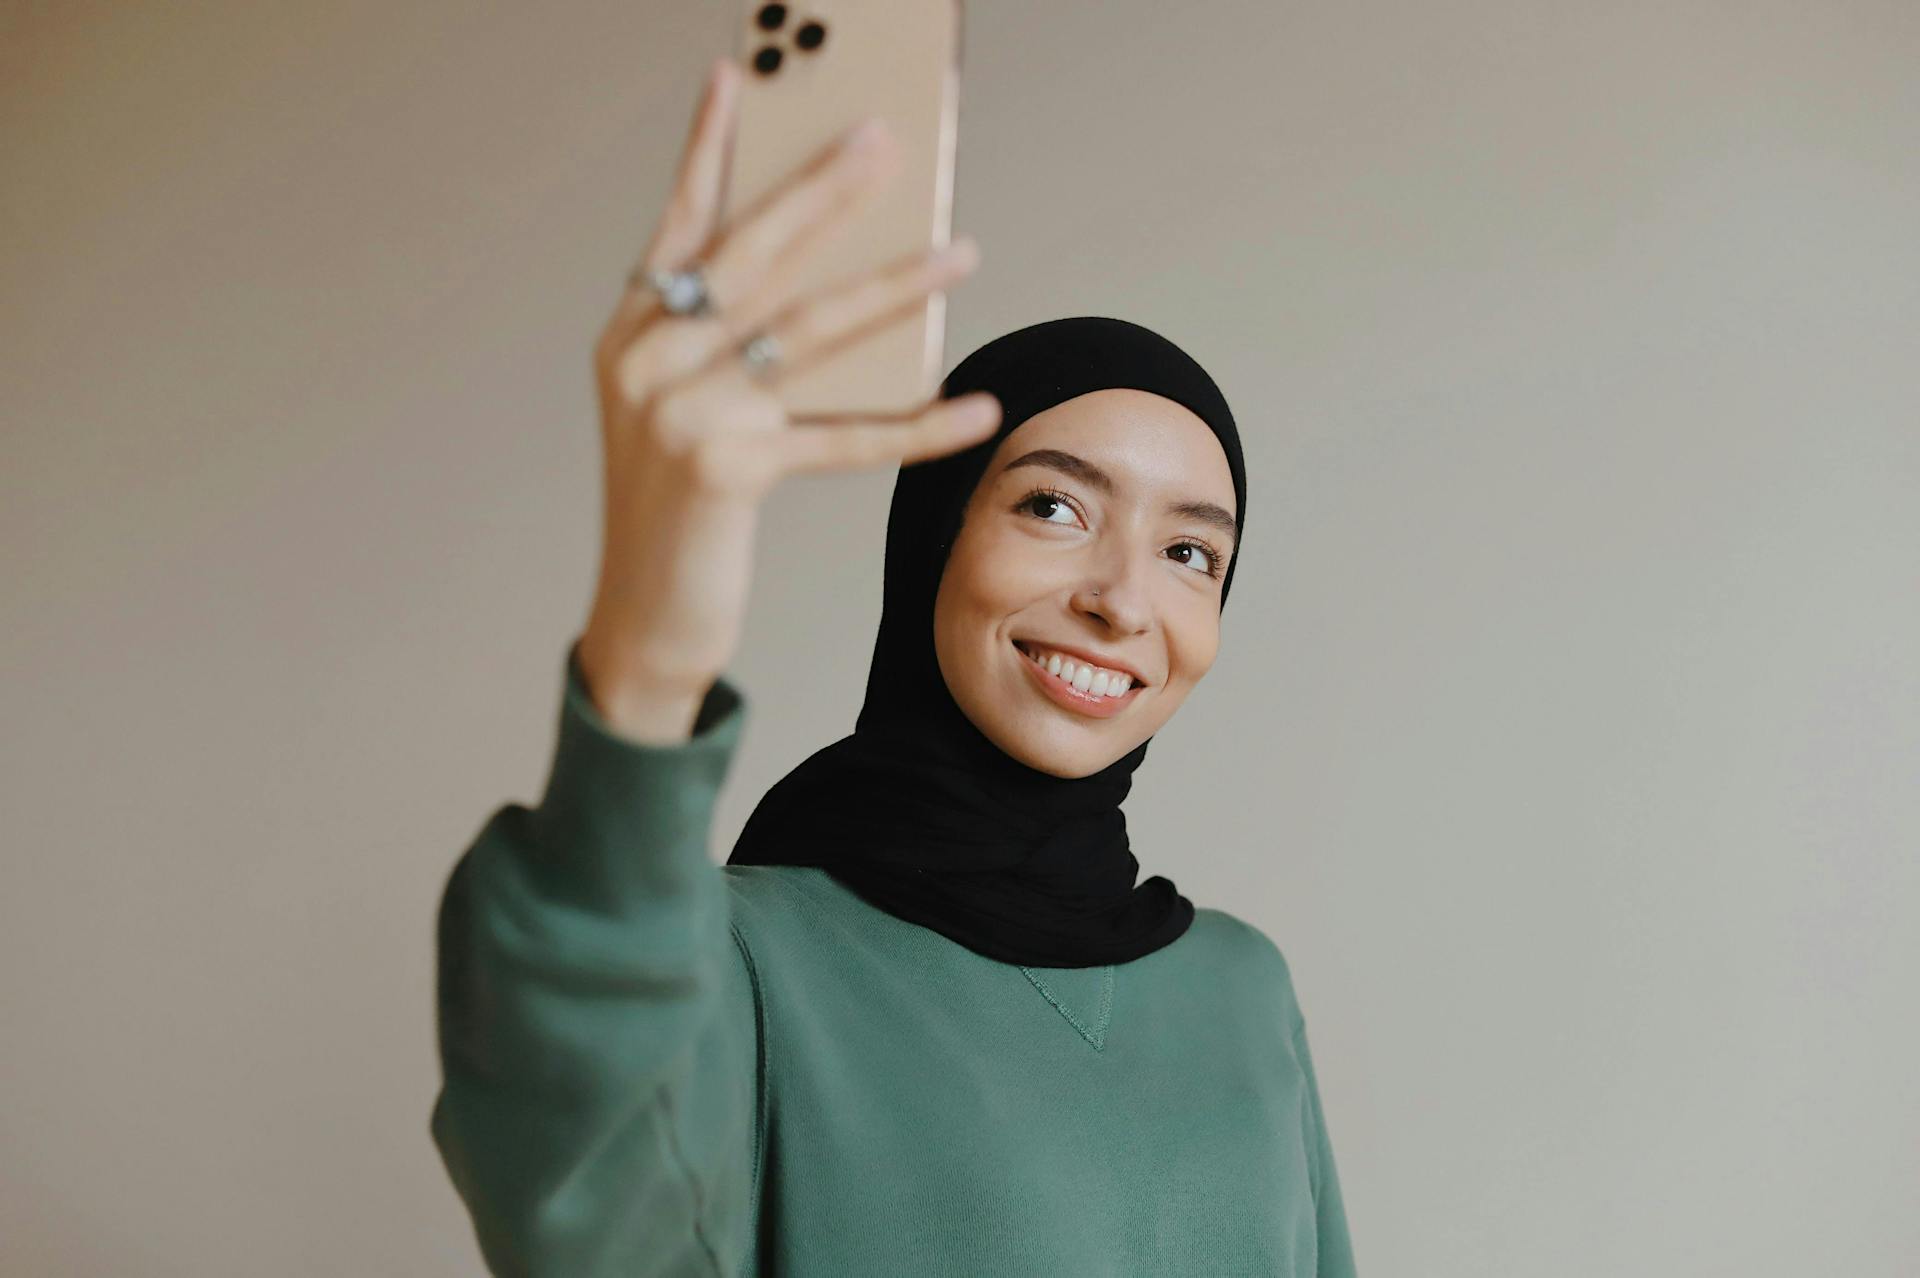 smiling middle eastern woman holding up an iphone to take a selfie